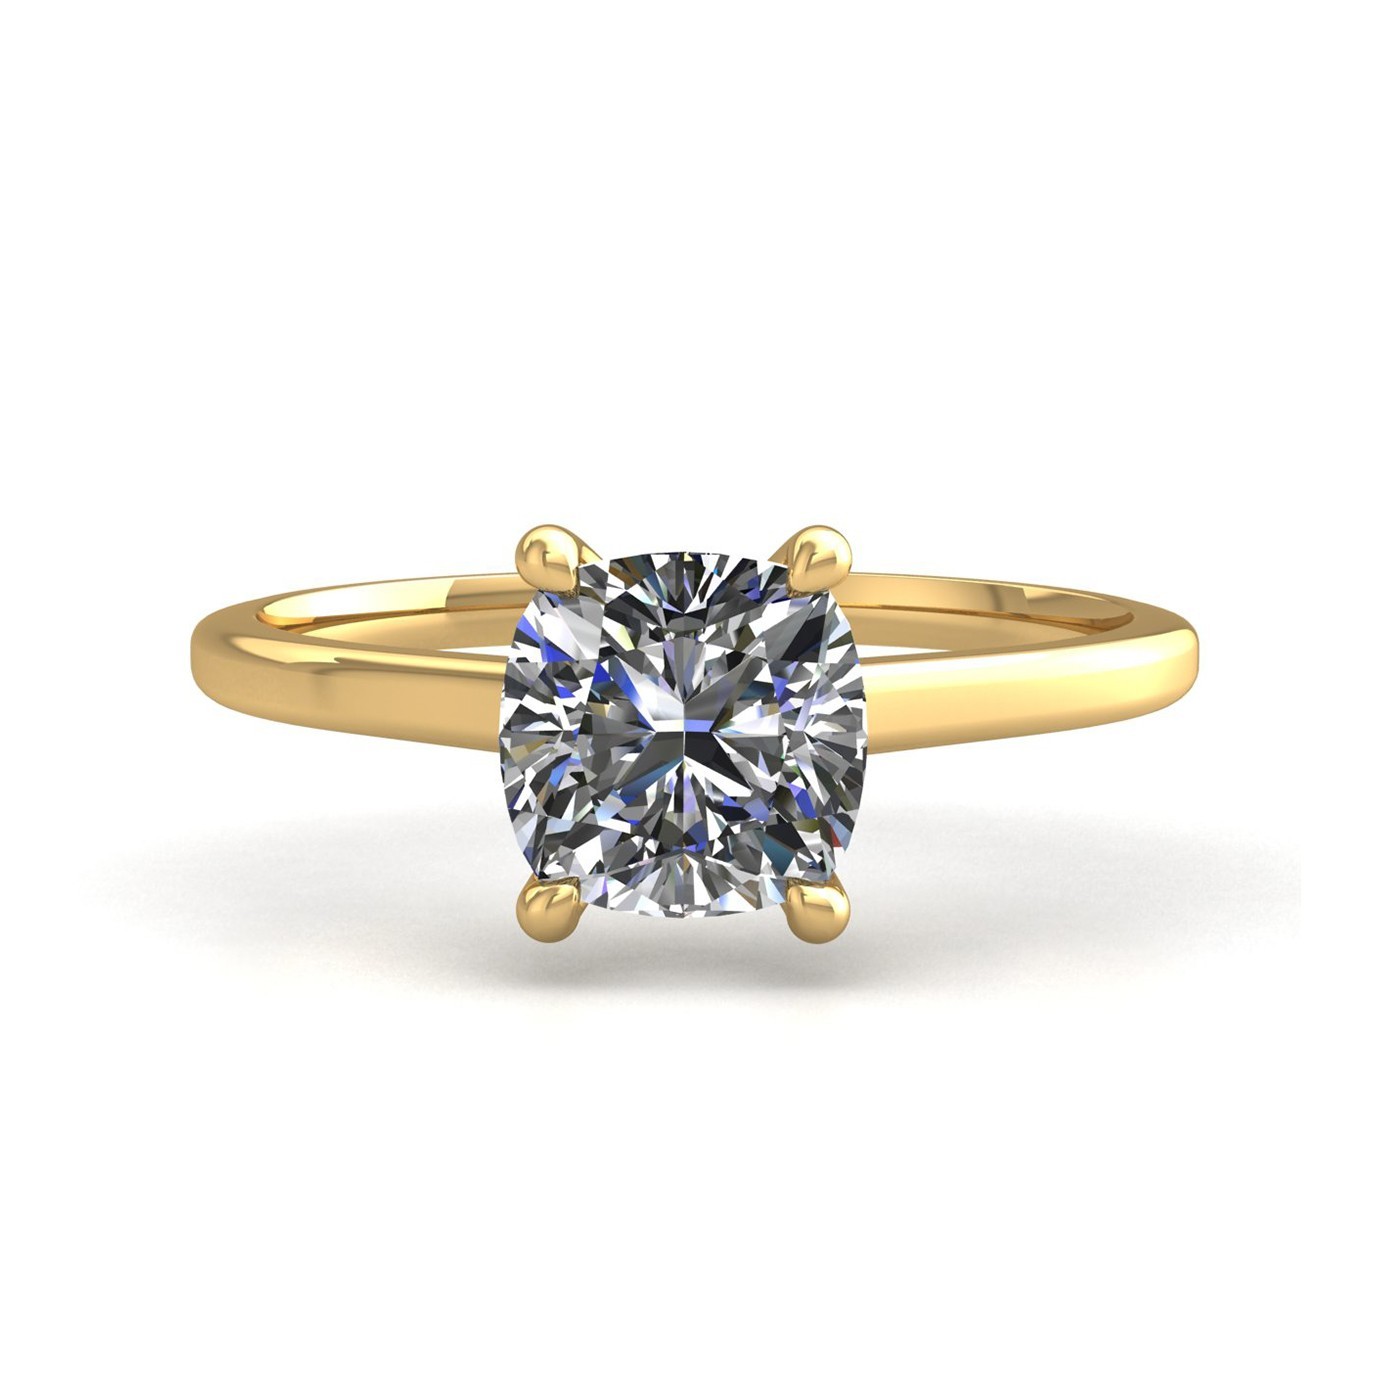 18k yellow gold 1.2ct 4 prongs solitaire cushion cut diamond engagement ring with whisper thin band Photos & images